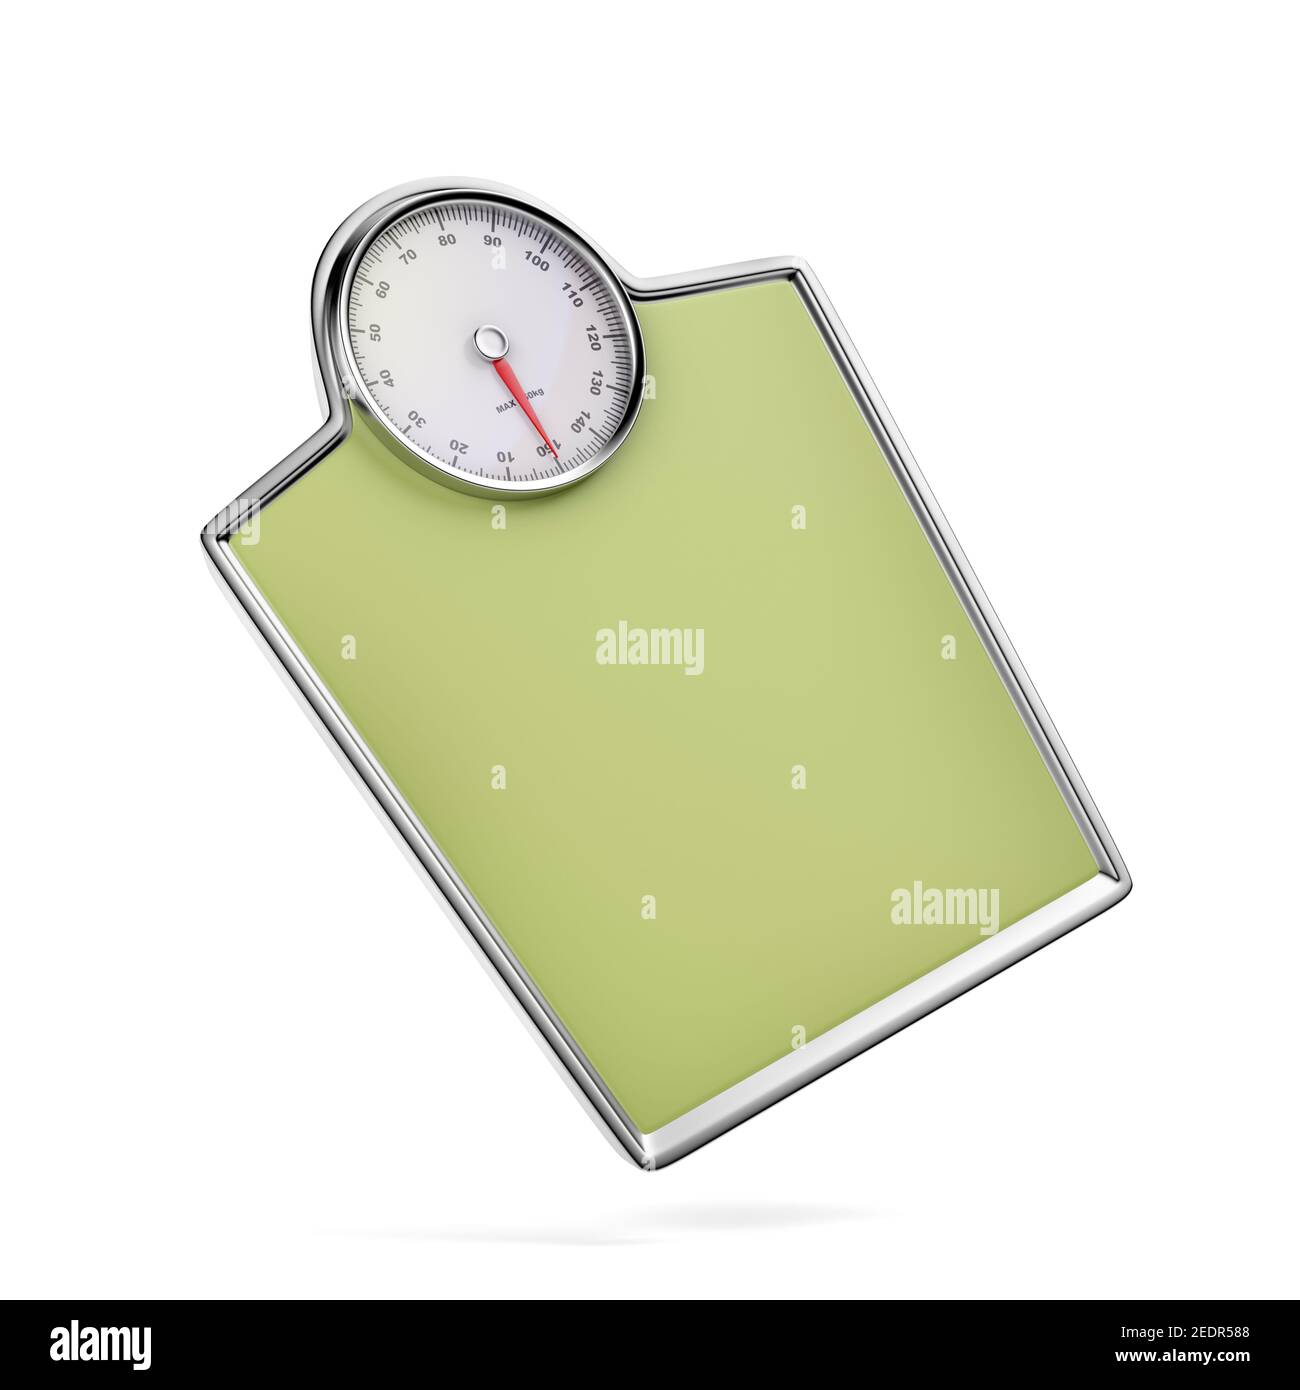 https://c8.alamy.com/comp/2EDR588/mechanical-weighing-scale-on-white-background-2EDR588.jpg